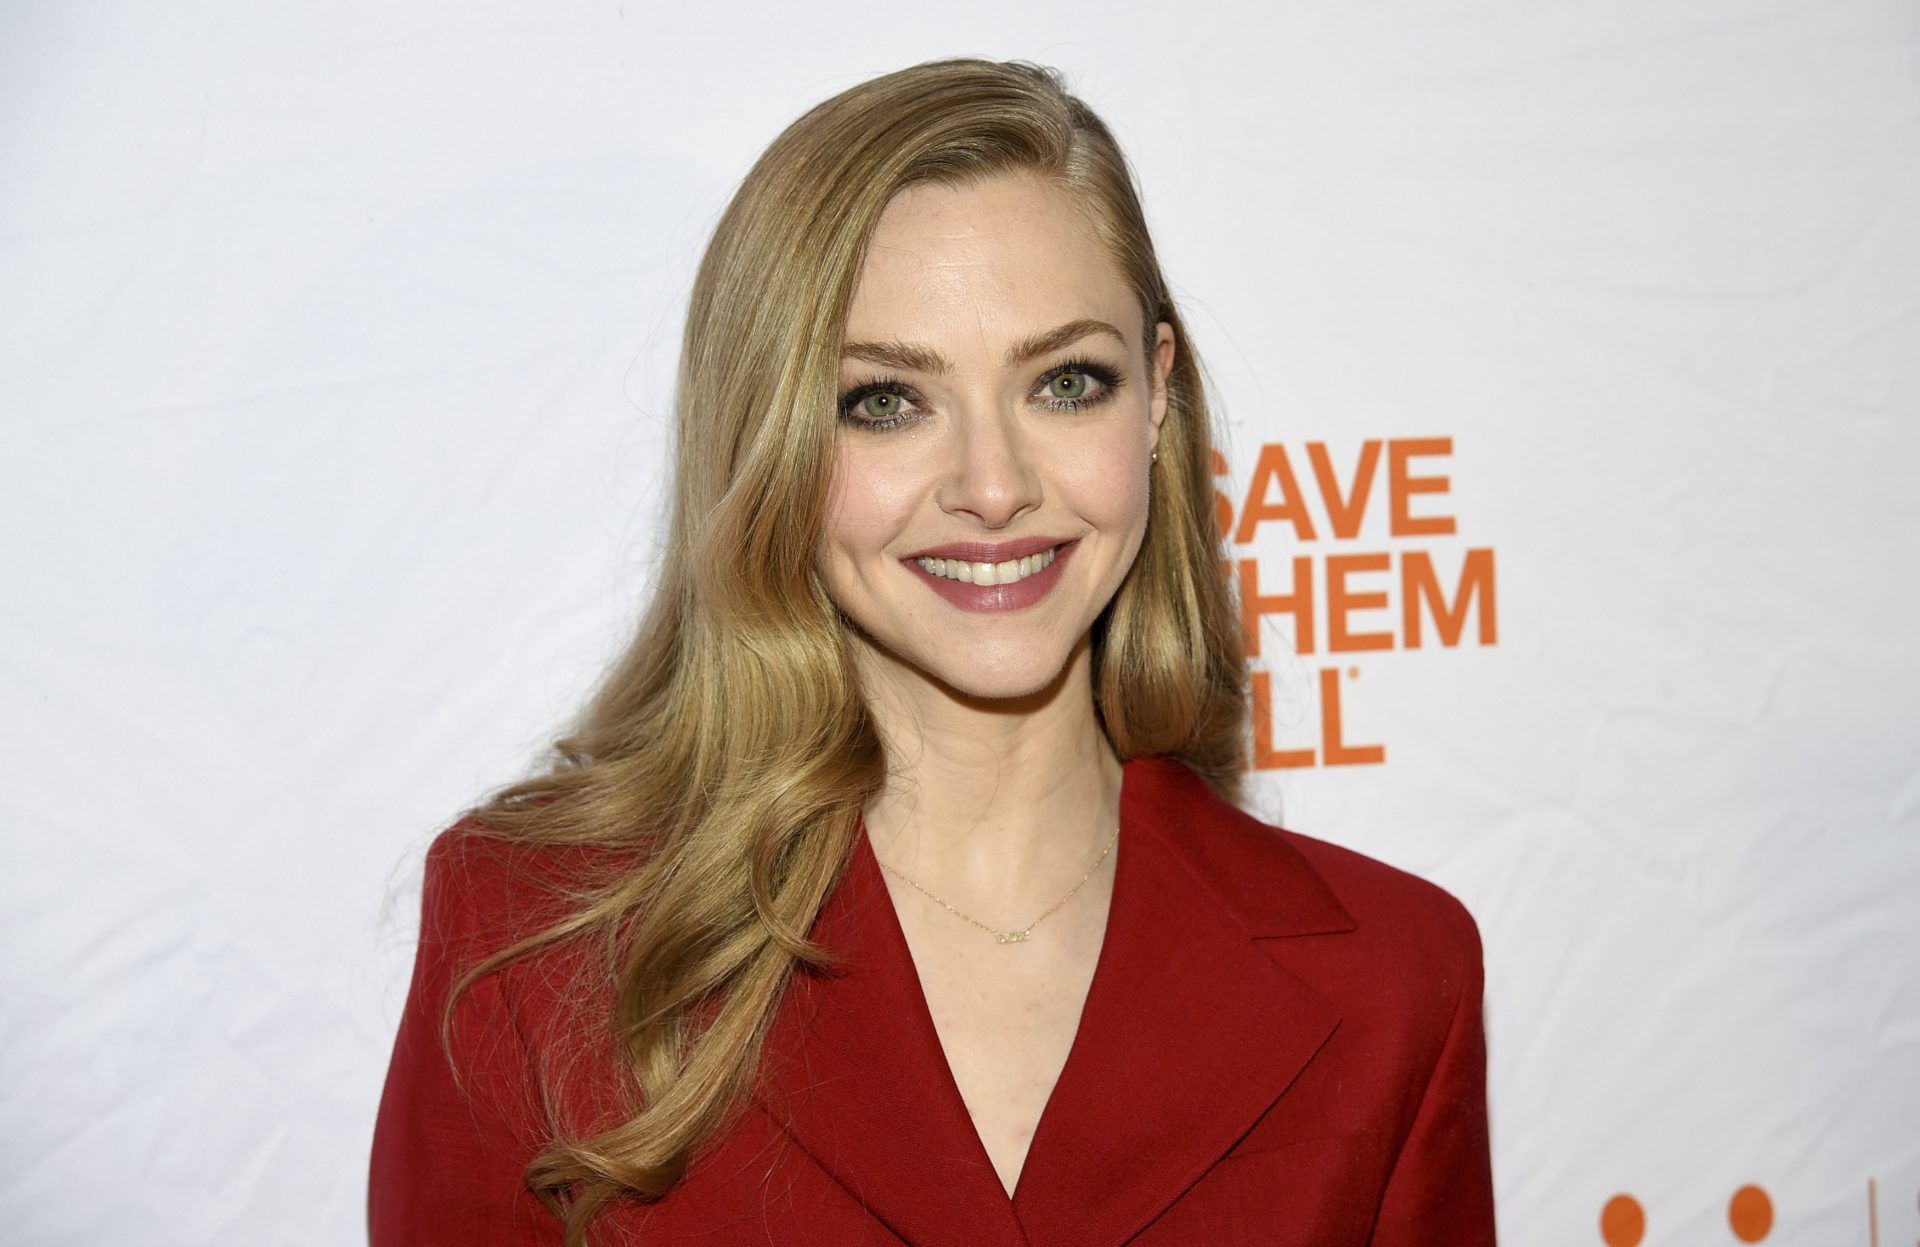 Actress Amanda Seyfried, who was born in Allentown, attends the fourth annual Best Friends Animal Society benefit gala in New York on April 2, 2019. Seyfried stars in the David Fincher film "Mank."